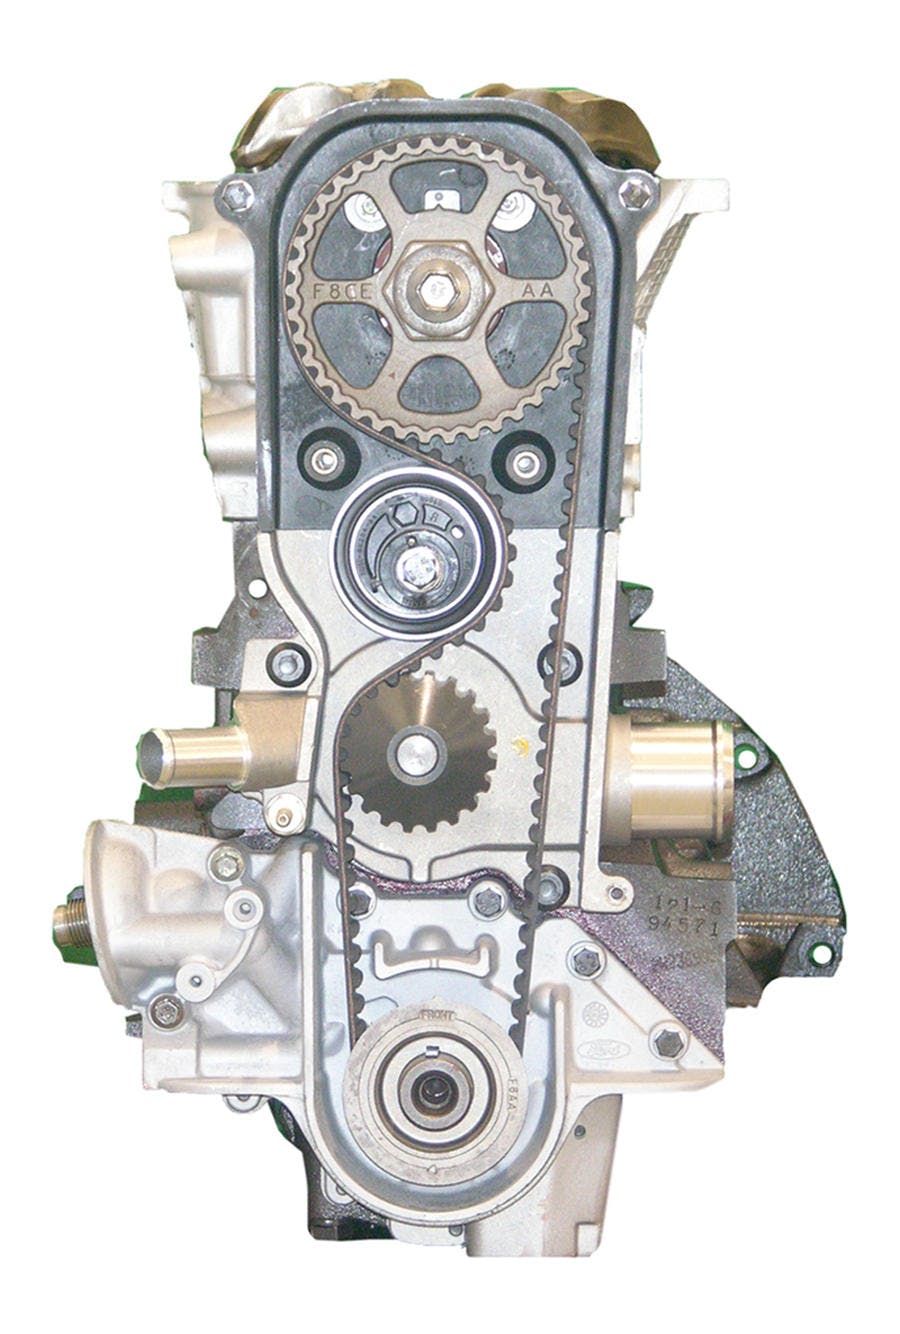 2L Inline-4 Engine for 2000-2002 Ford Escort